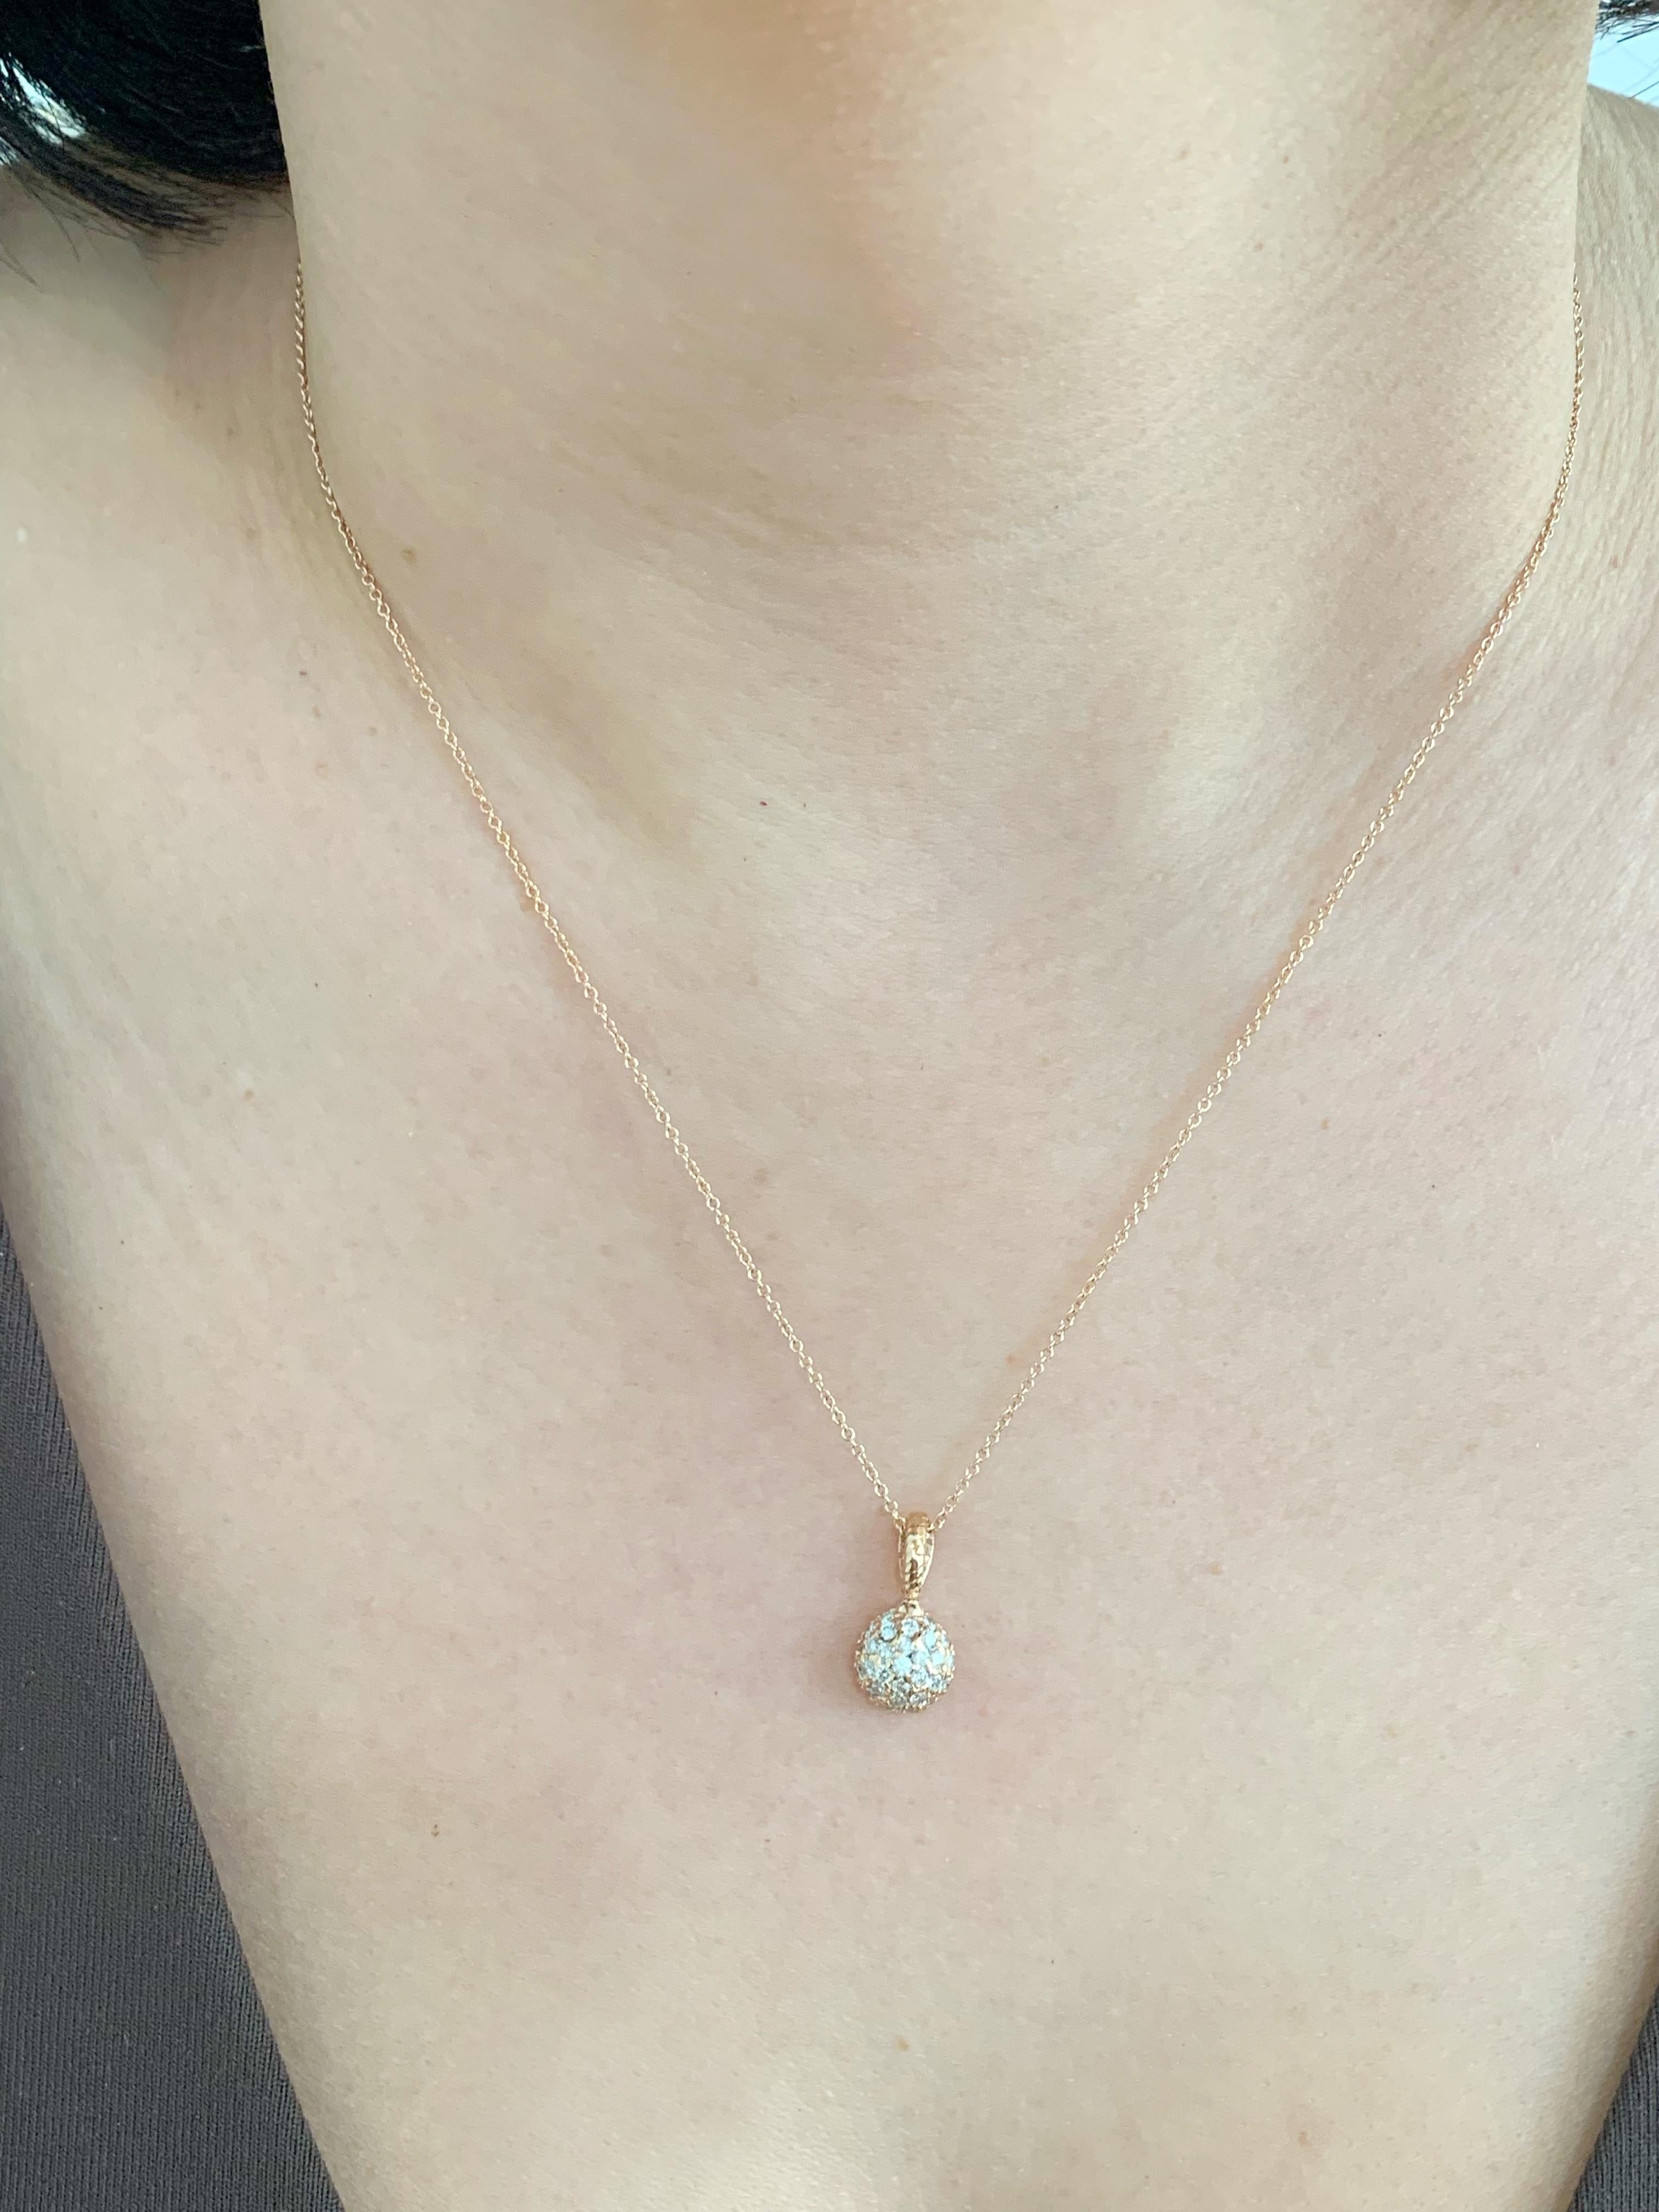 Crafted in 14K gold this pave pendant is an effortless piece to elevate your everyday look. Sitting under the collarbone, this pendant features glistening round diamonds set in a pave design. Stunning on its own and the perfect piece for